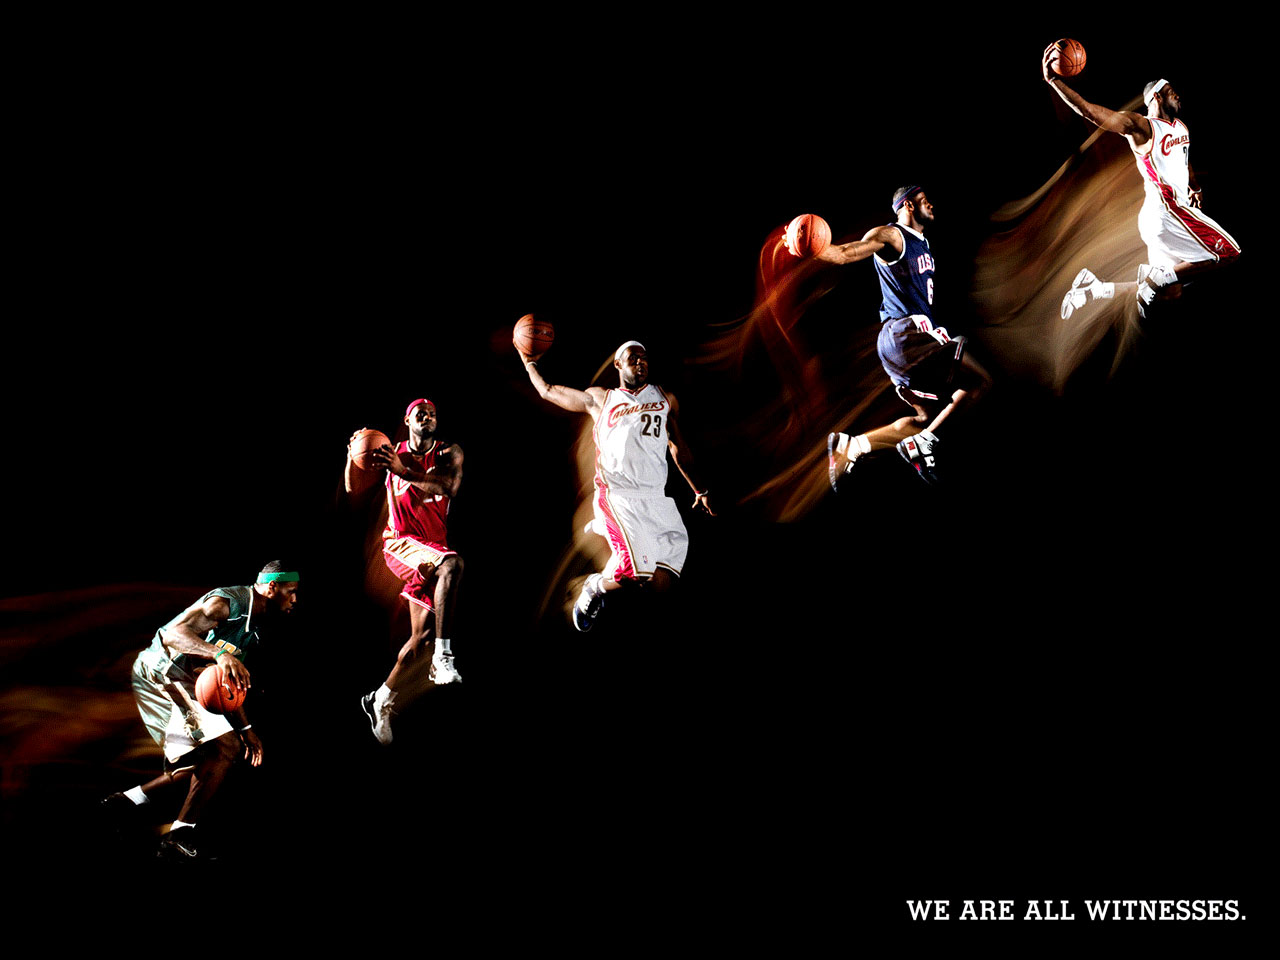 HDMOU TOP 23 LEBRON JAMES WALLPAPERS IN HD